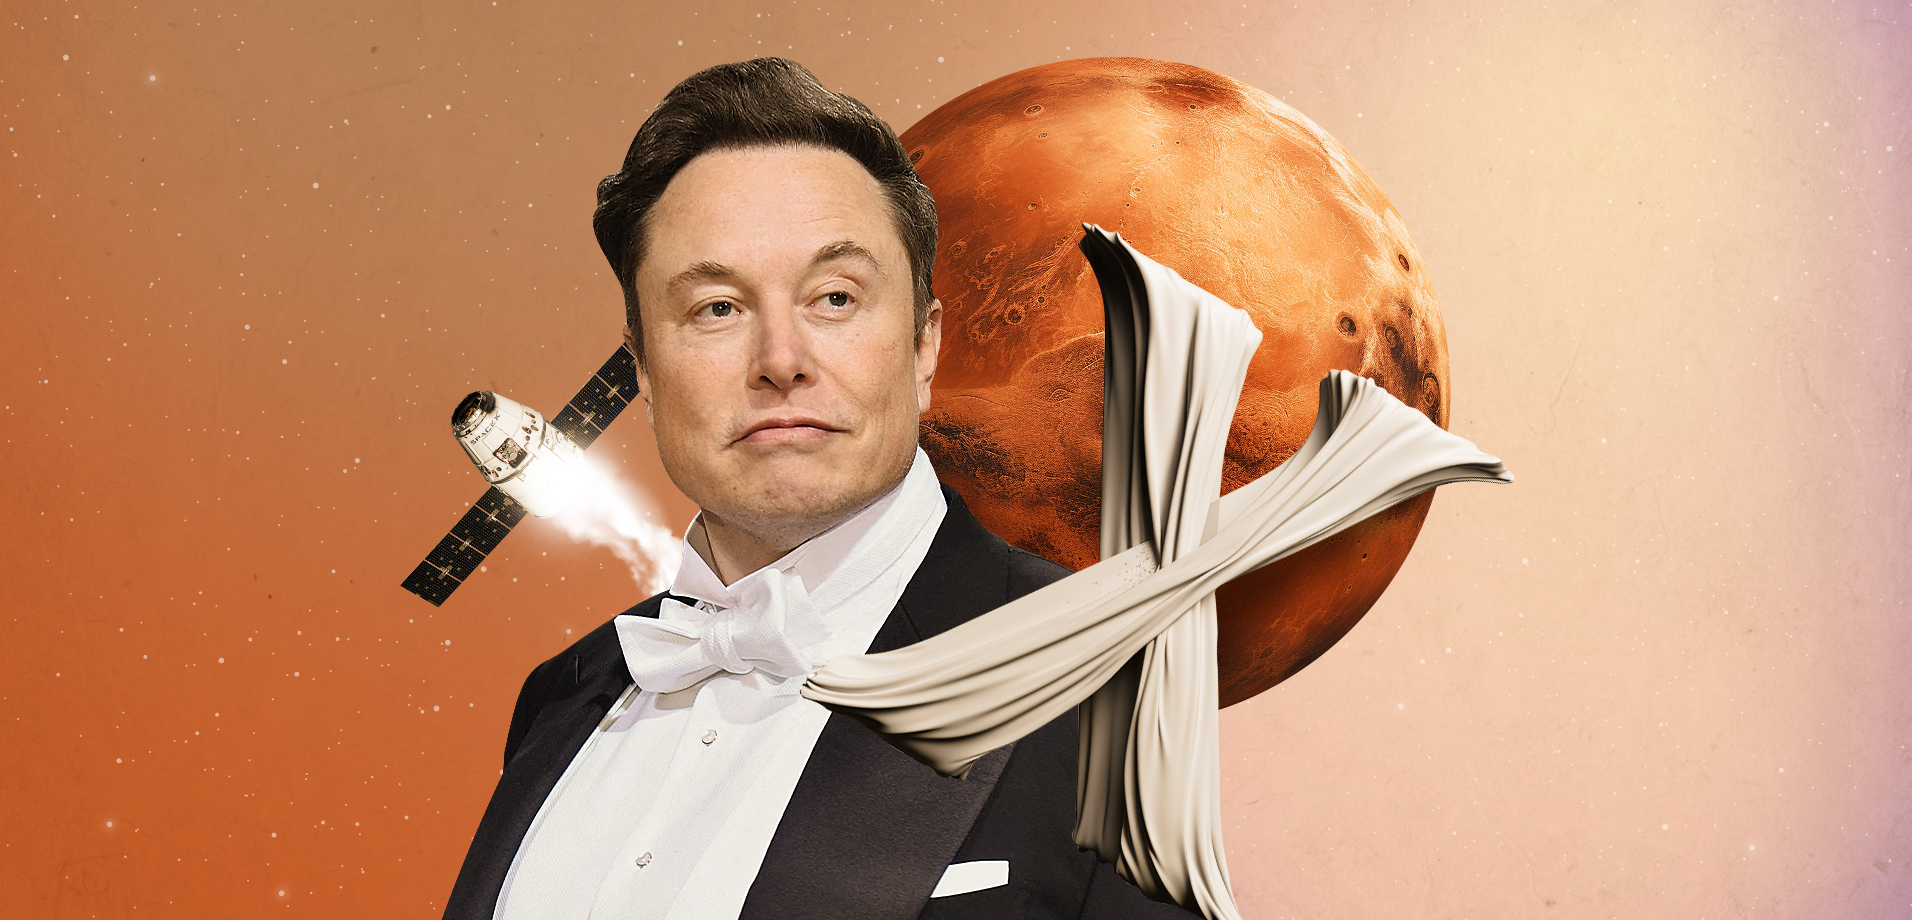 Elon Musk and the Letter X – What’s Behind Musk’s Affinity For X?